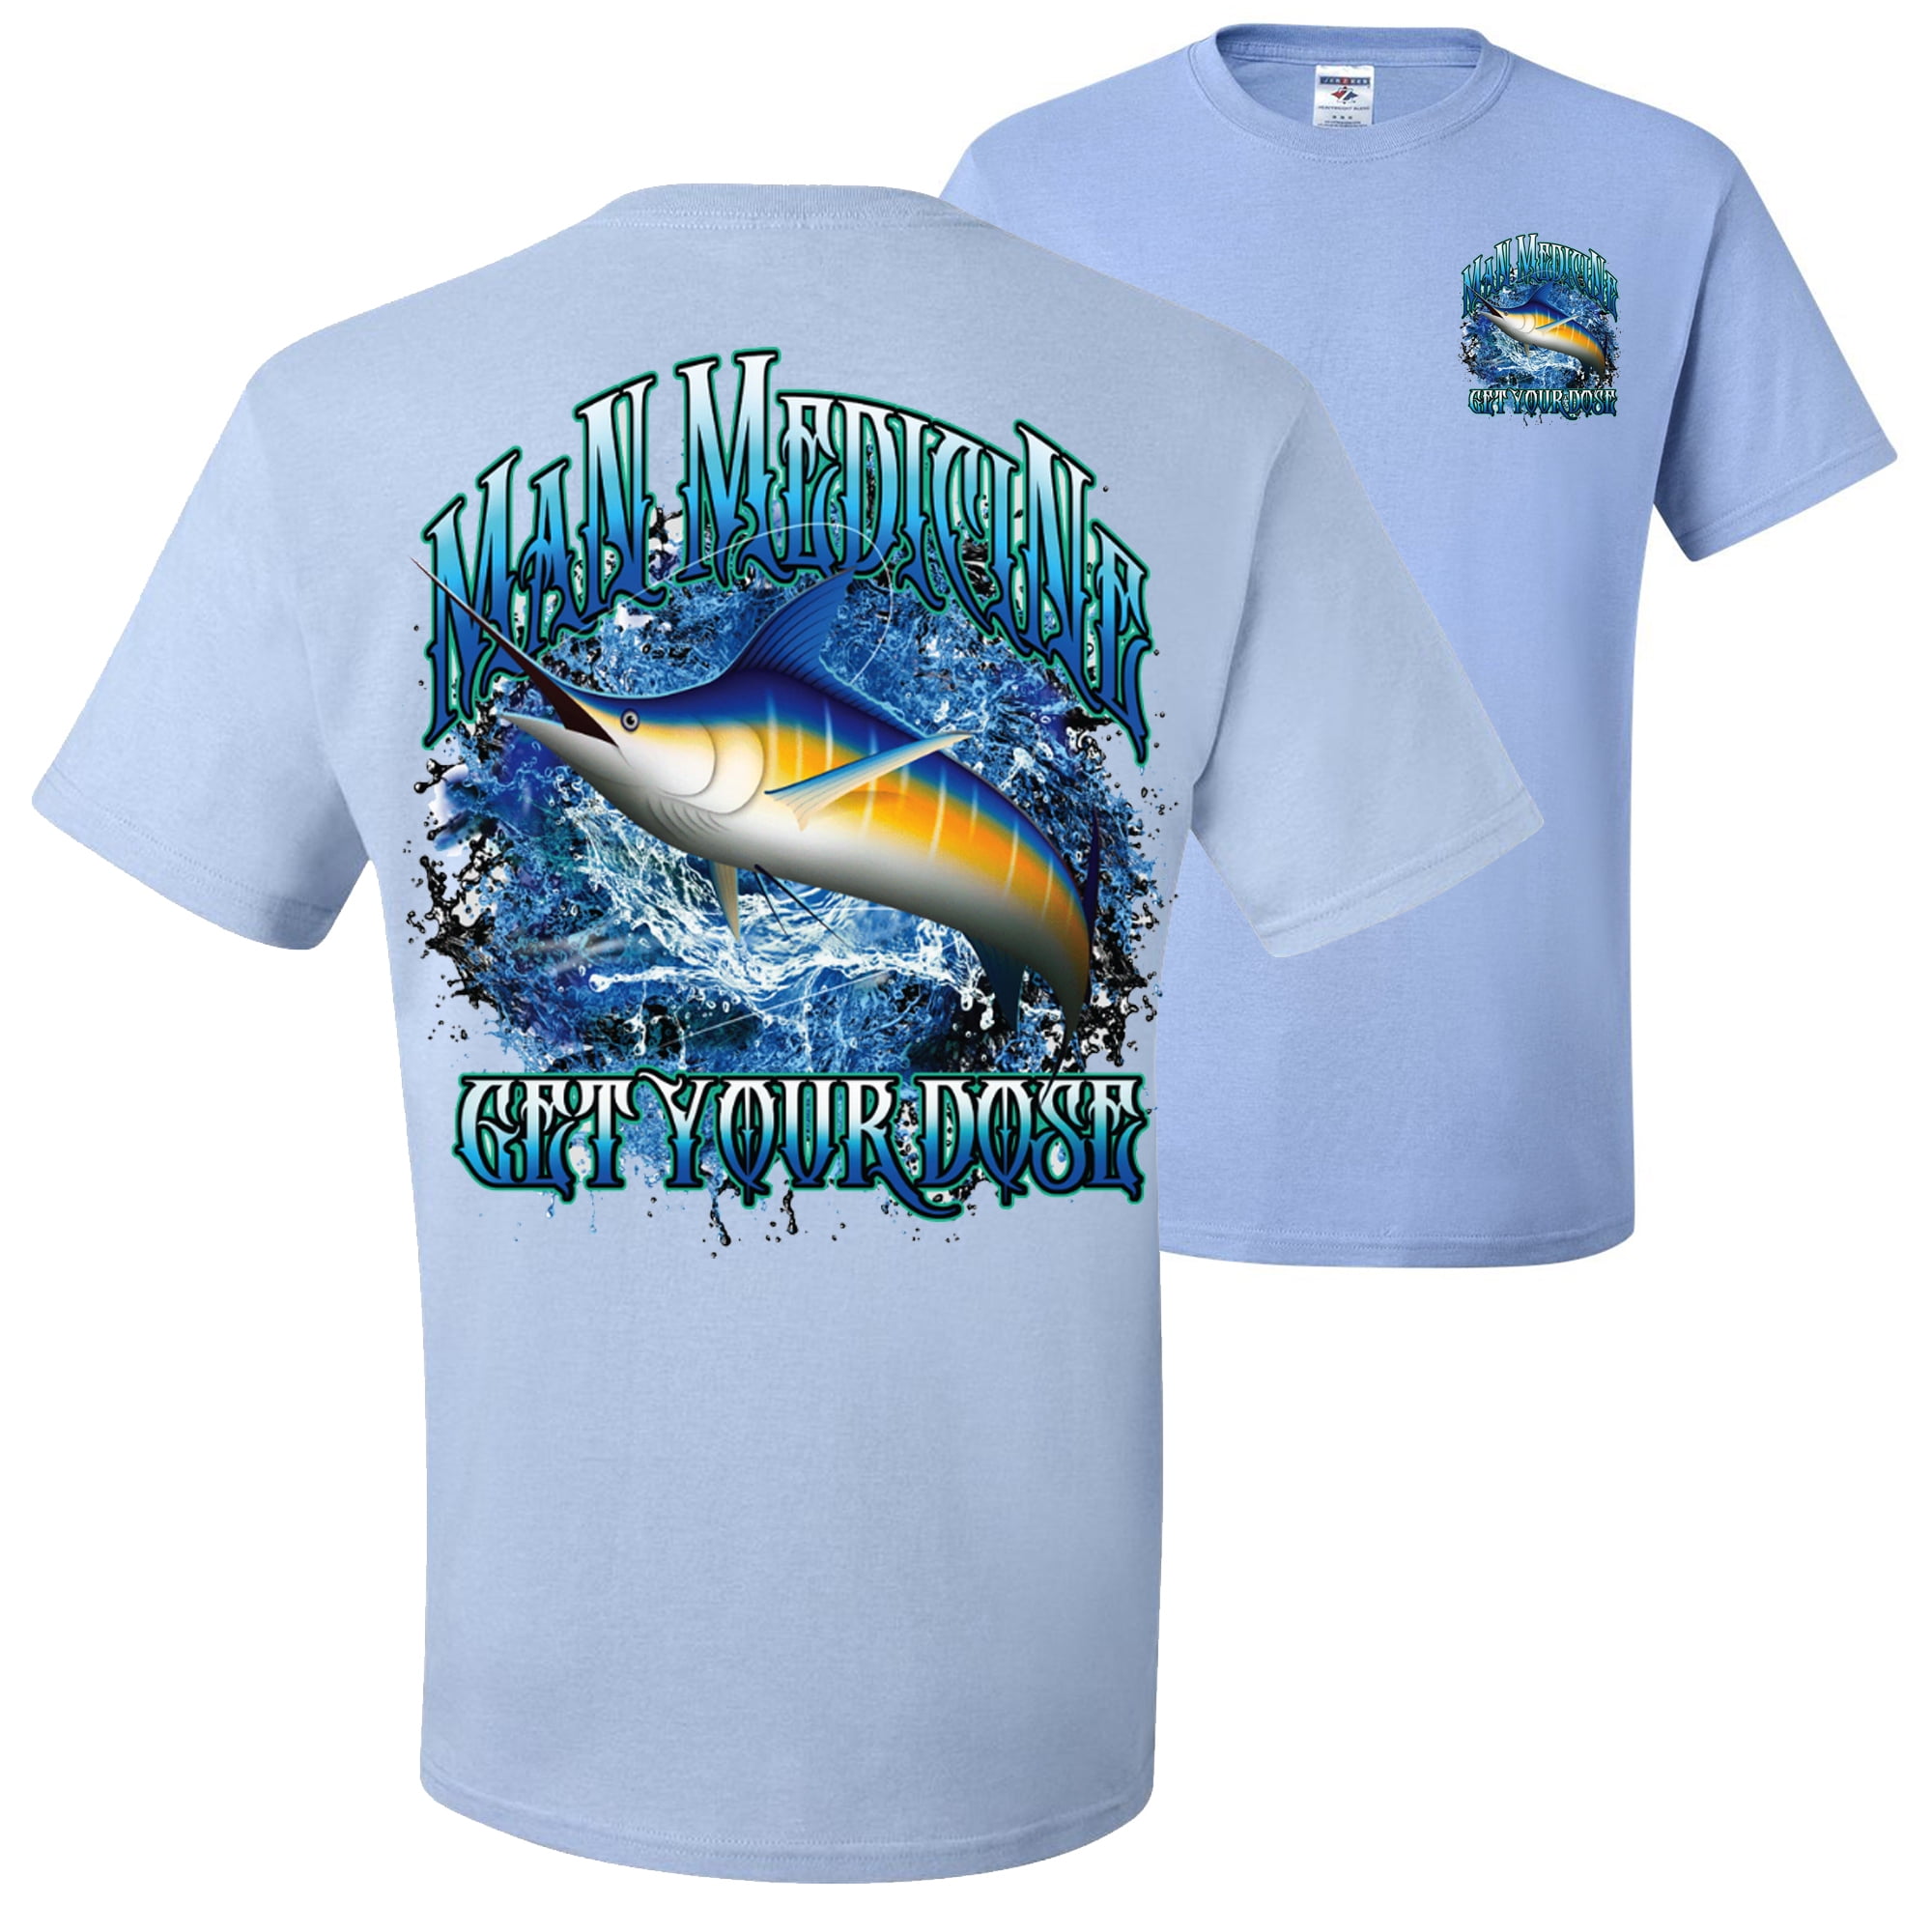 Swordfish Man Medicine Get Your Dose Fish Lovers FRONT AND BACK Mens  T-shirts , White, Small